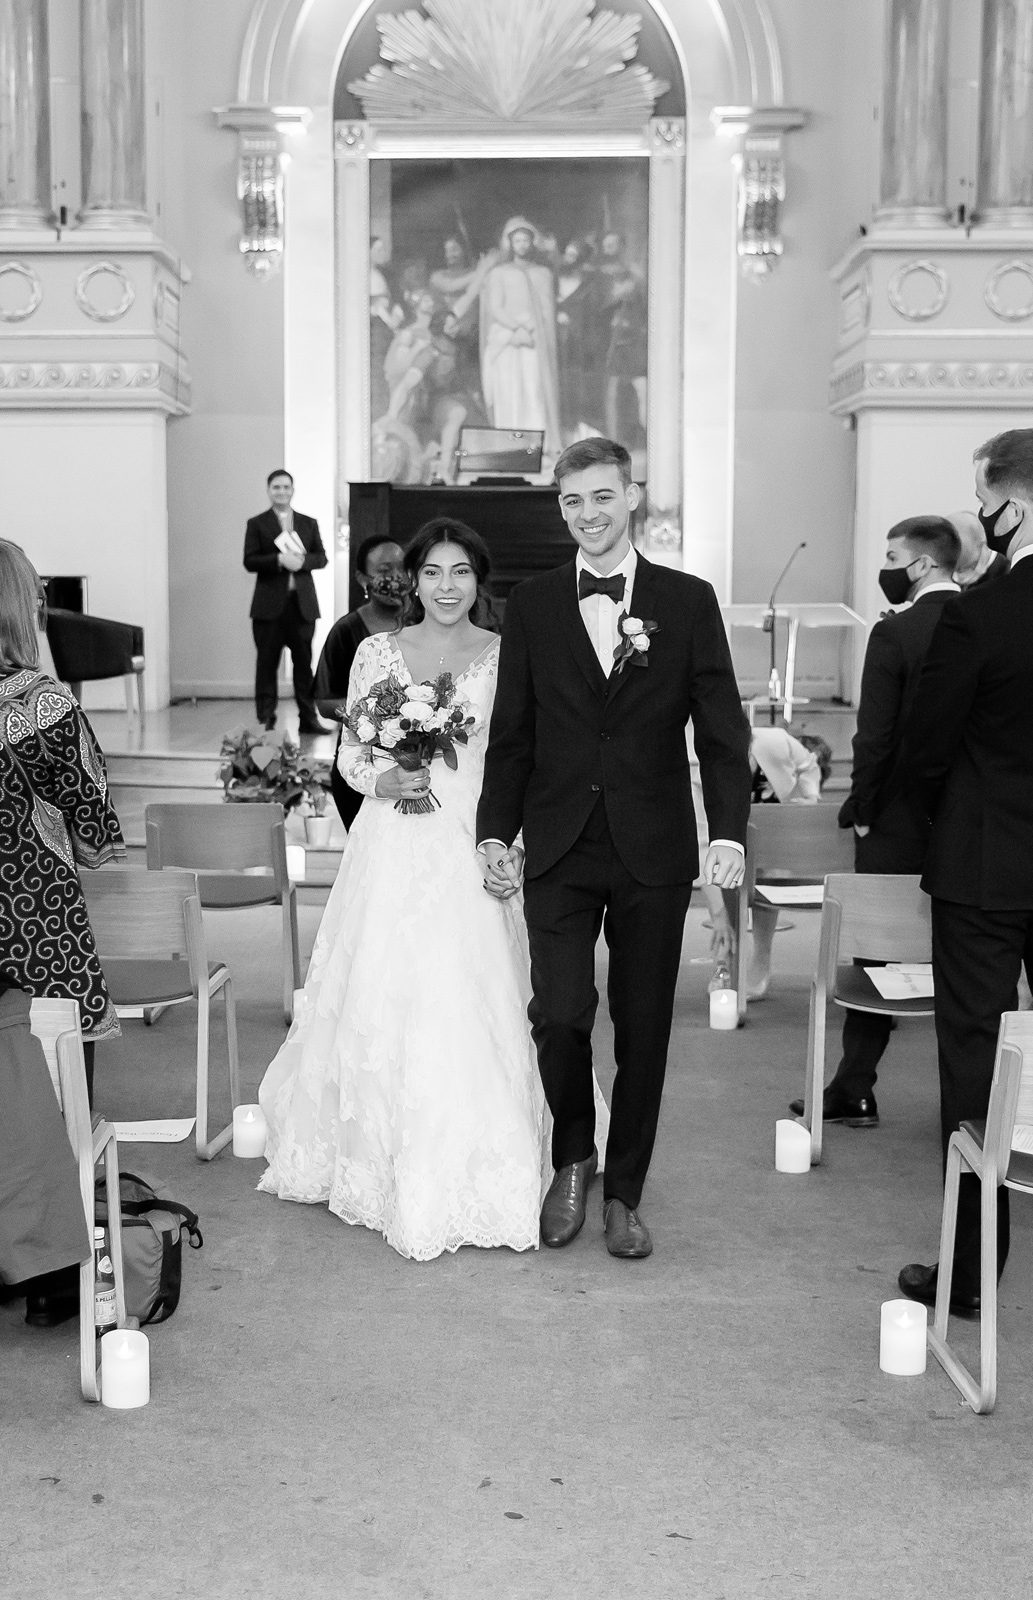 Bride and groom wedding recessional All Souls church London